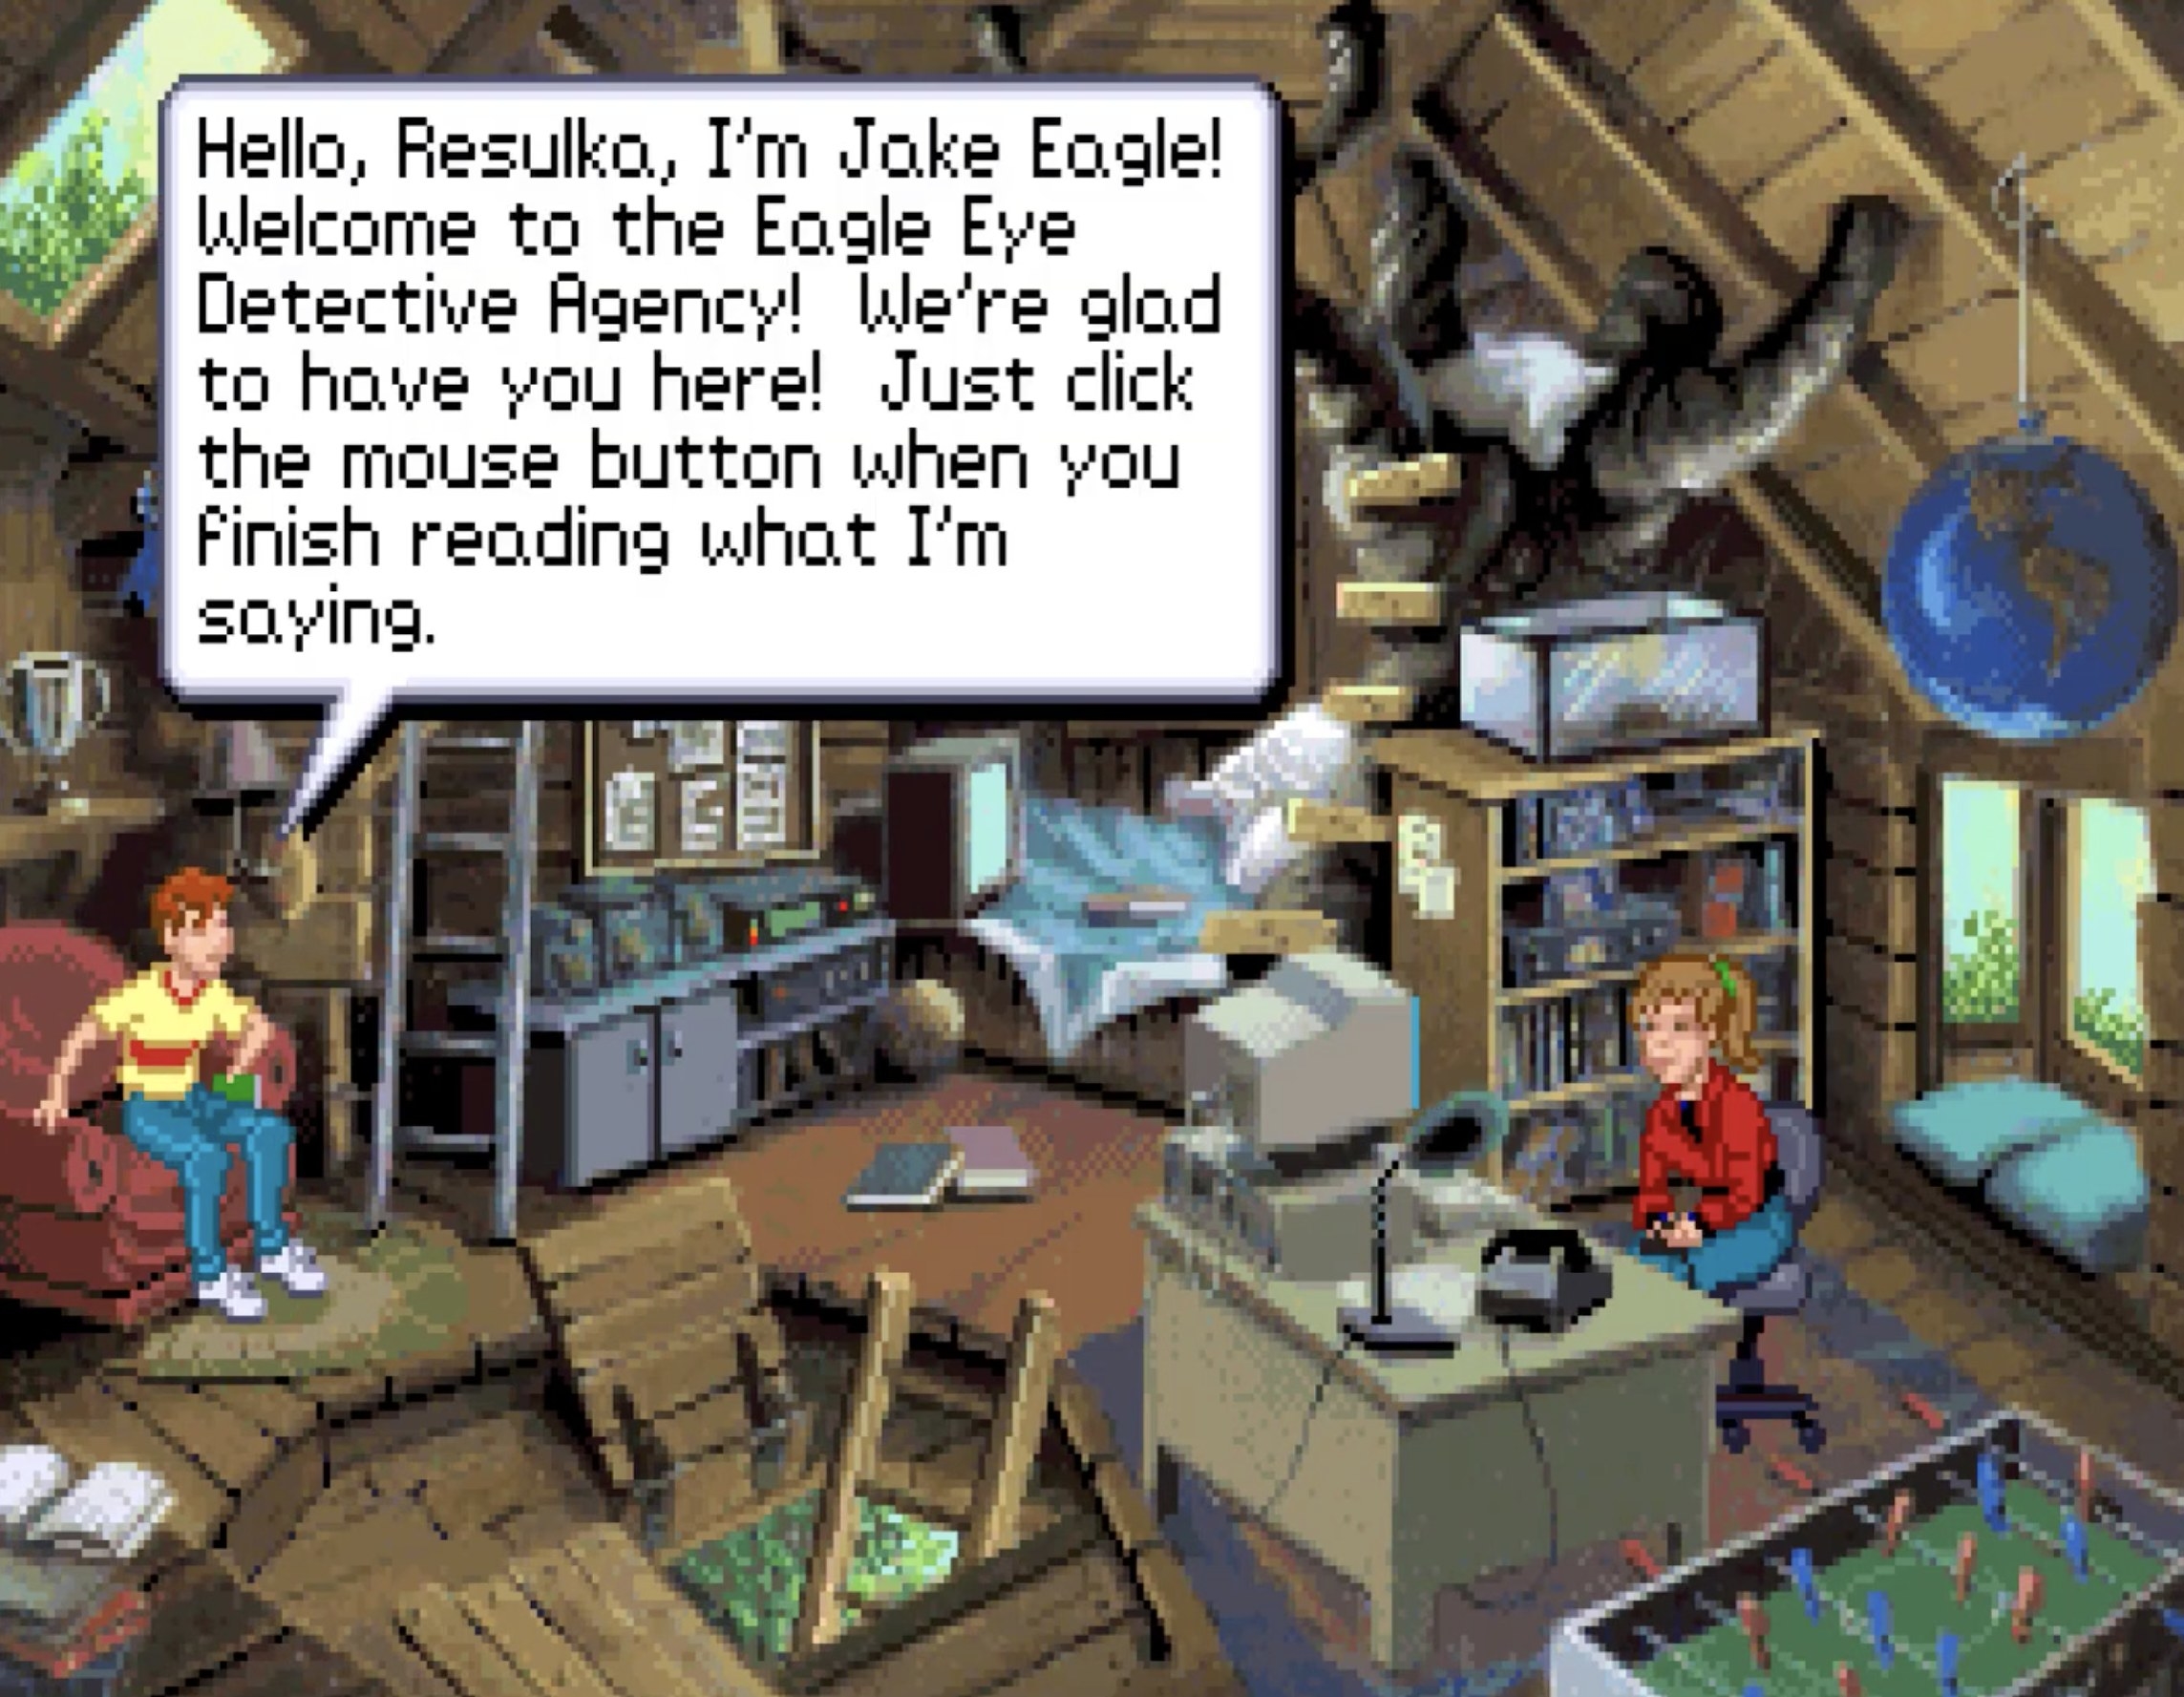 Jake and Jennifer Eagle sit in their treehouse, welcoming the player